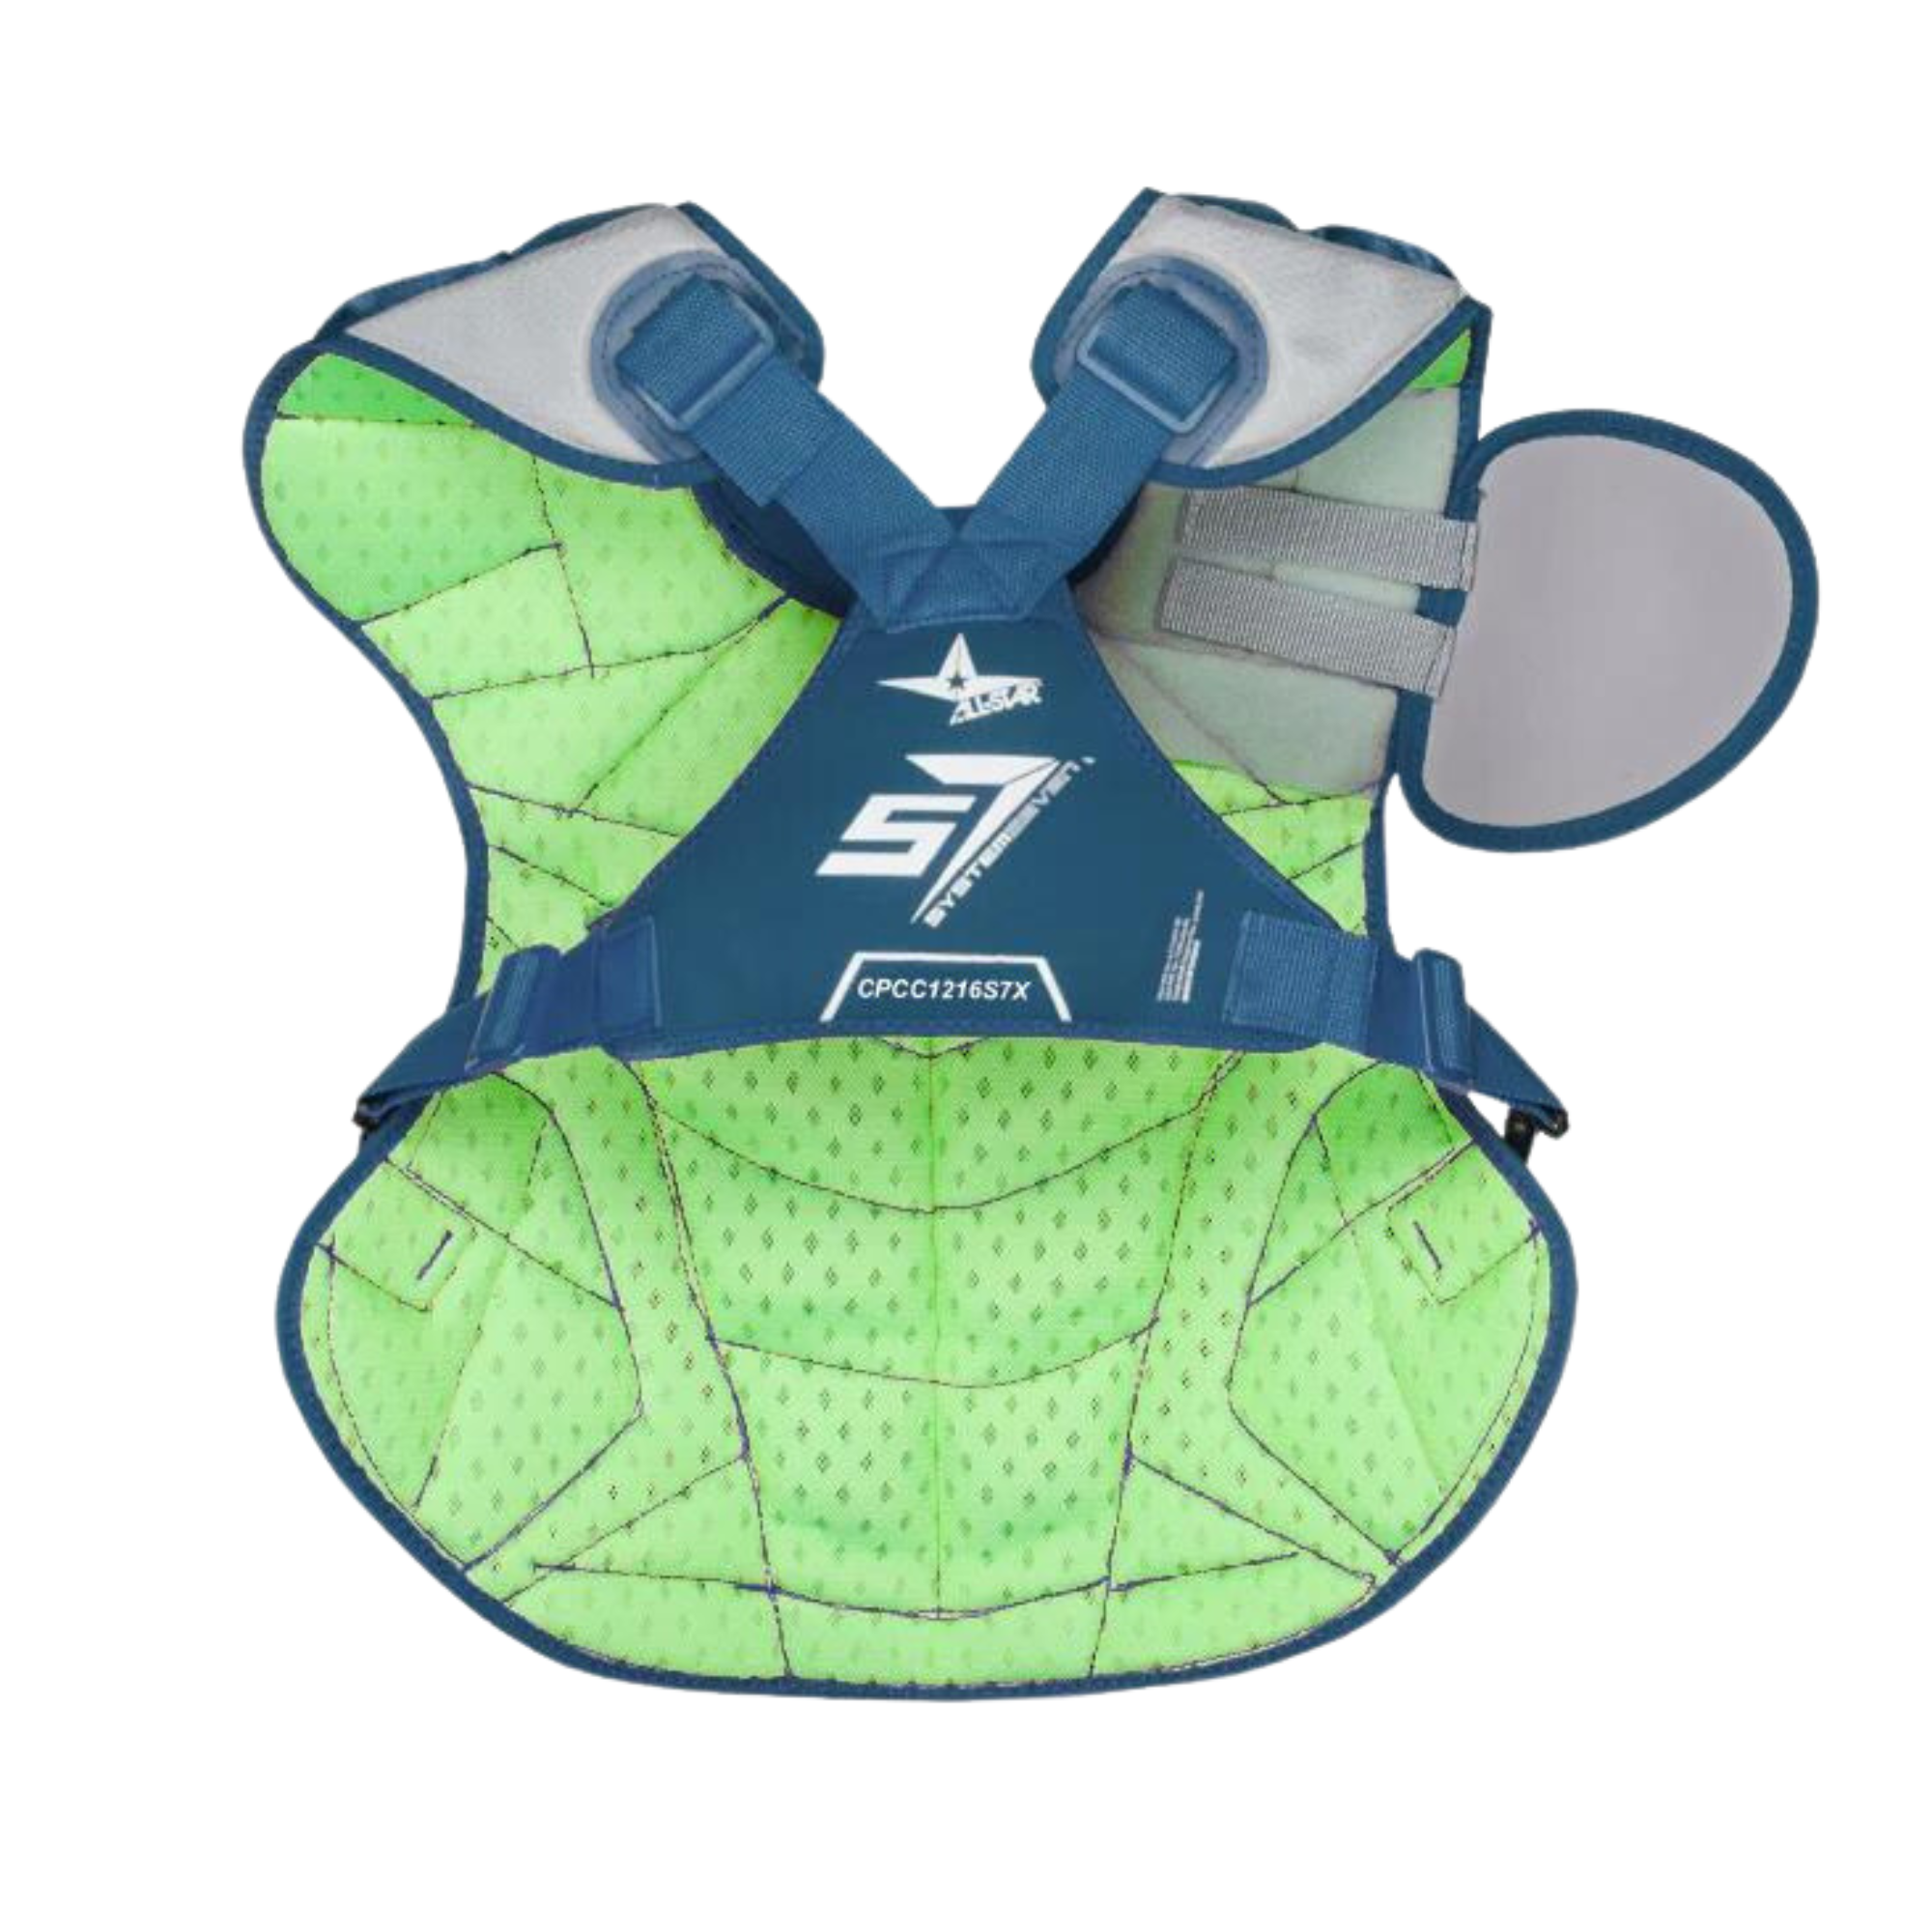 All-Star S7 Axis Chest Protector / Meets NOCSAE / Ages 9-12